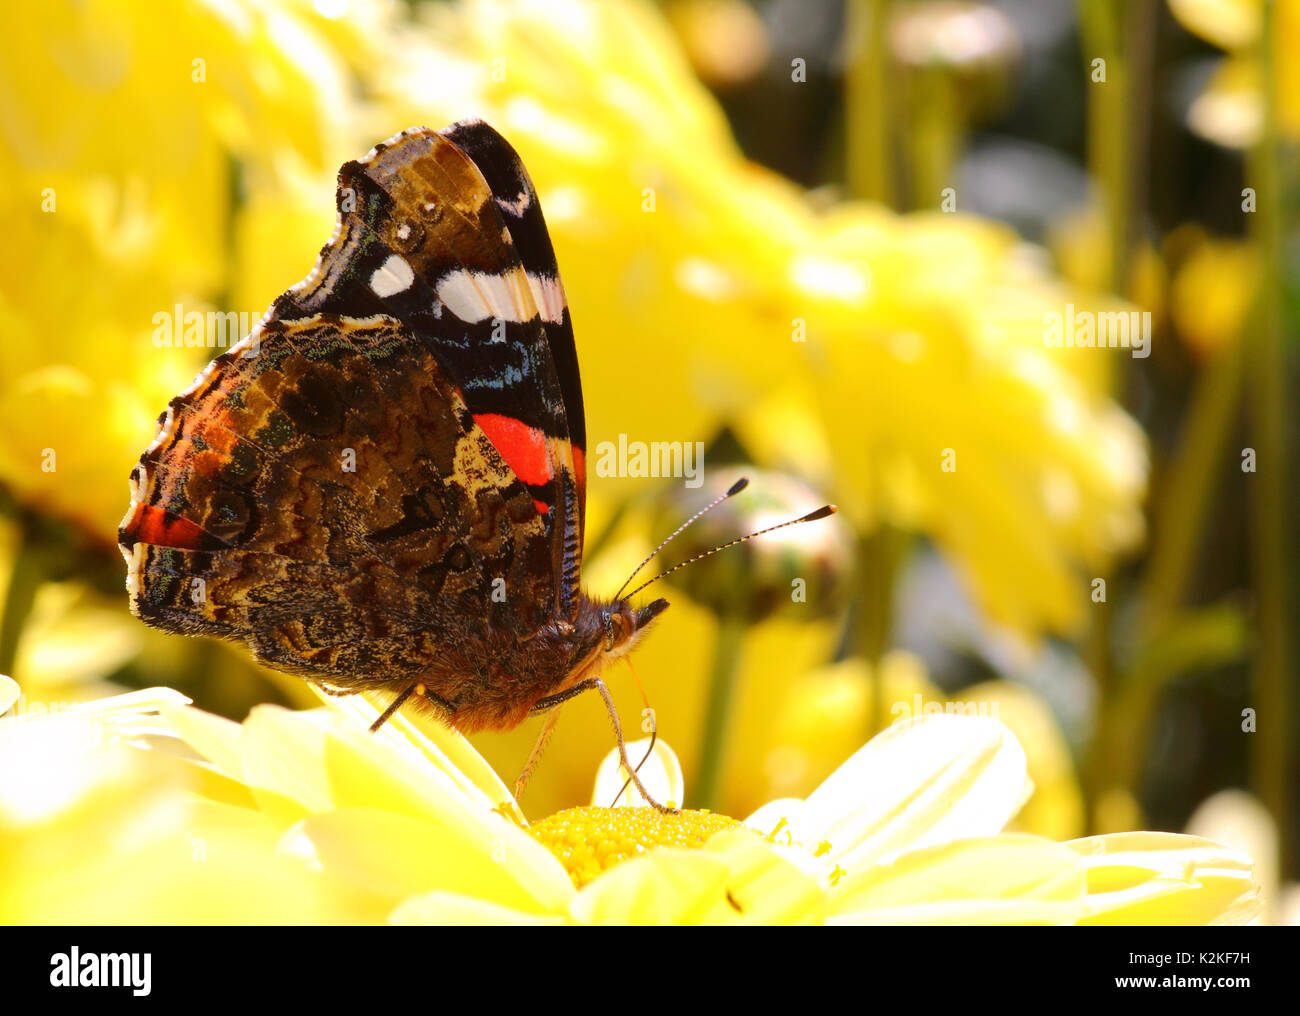 Leeds, UK. 31st Aug, 2017. UK Weather. Insects were busy pollinating the beautiful flowers at Golden Acre Park in Leeds, West Yorkshire when the sun came out this afternoon. This red admiral butterfly was collecting pollen from a chrysanthemum. Taken on the 31st August 2017. Credit: Victoria Gardner/Alamy Live News Stock Photo